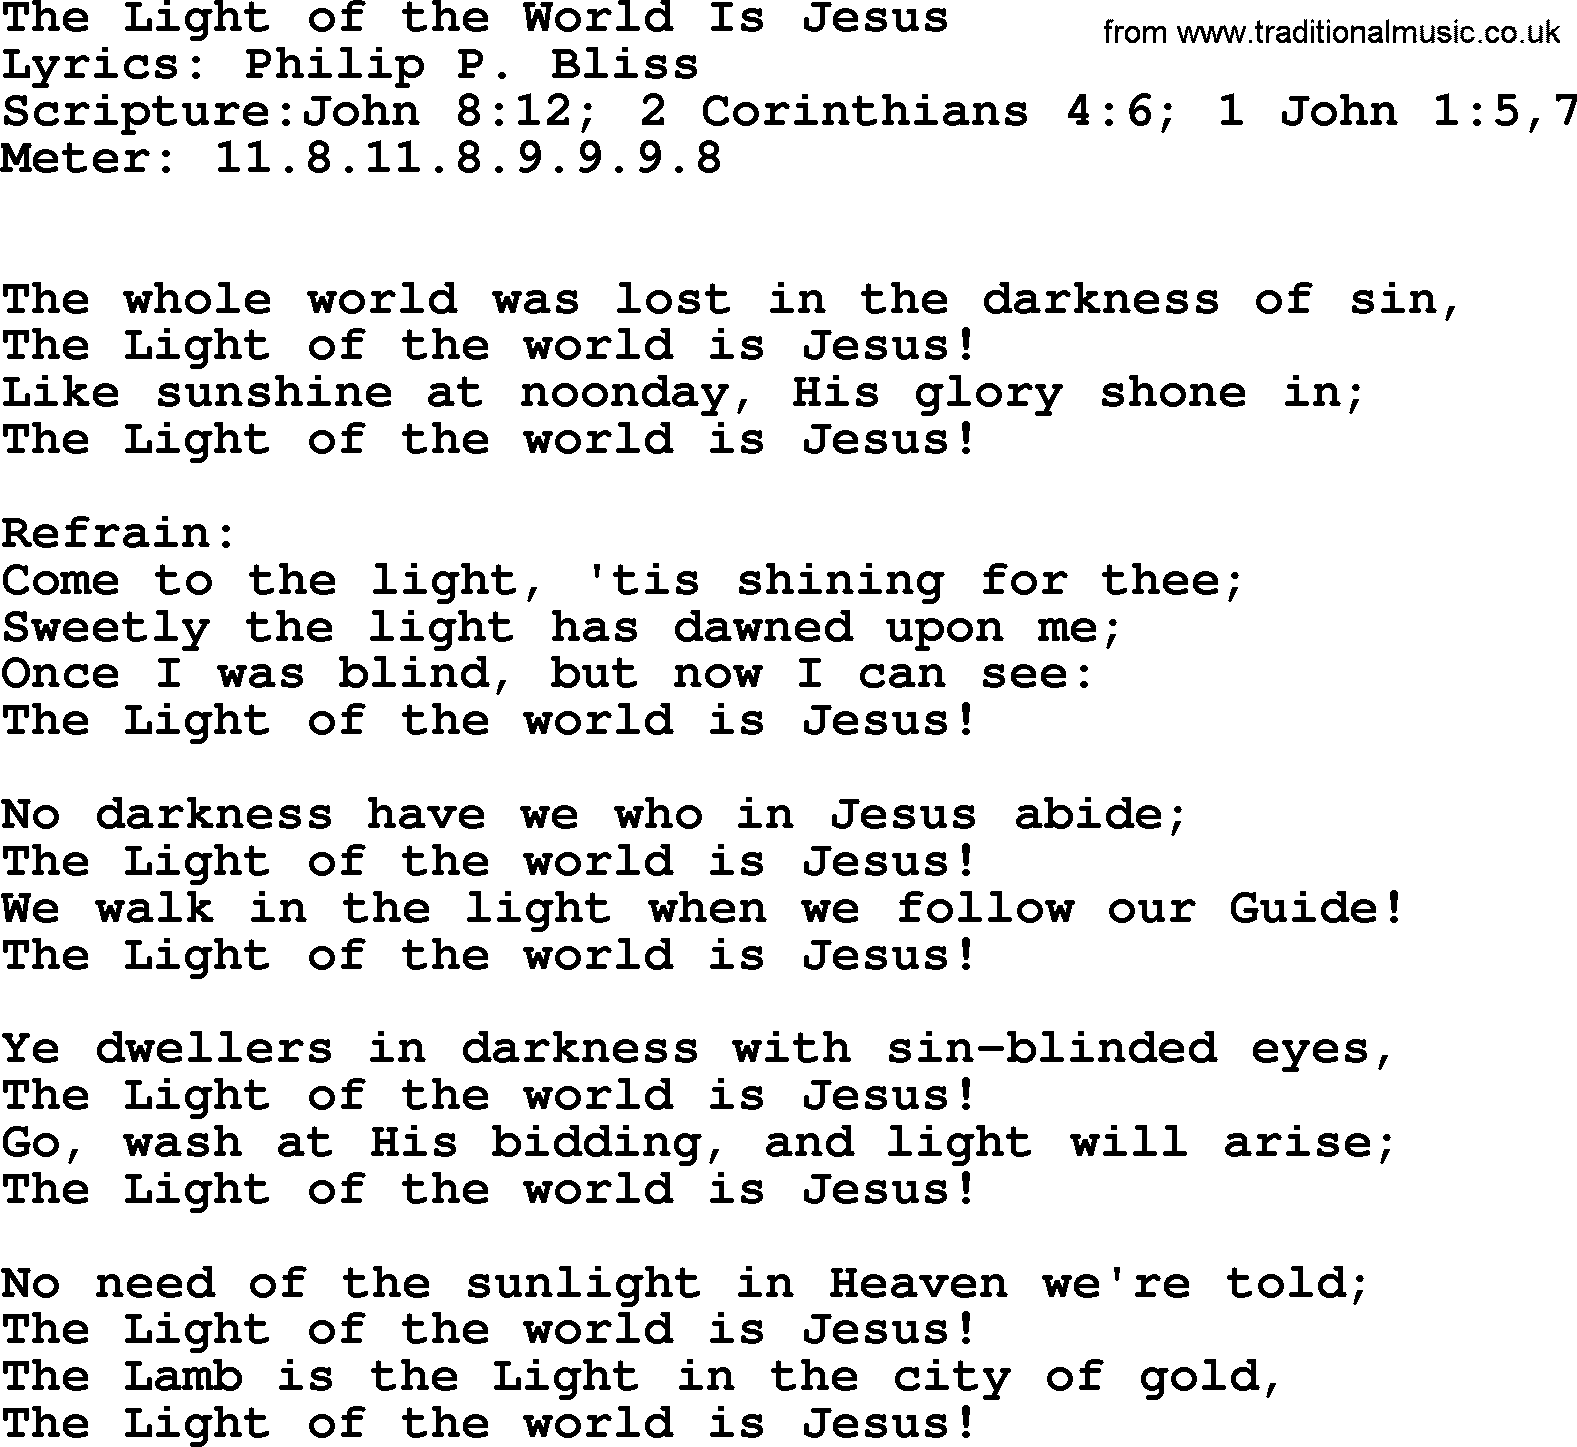 Hymns about  Angels, Hymn: The Light of the World Is Jesus, lyrics, sheet music, midi & Mp3 music with PDF